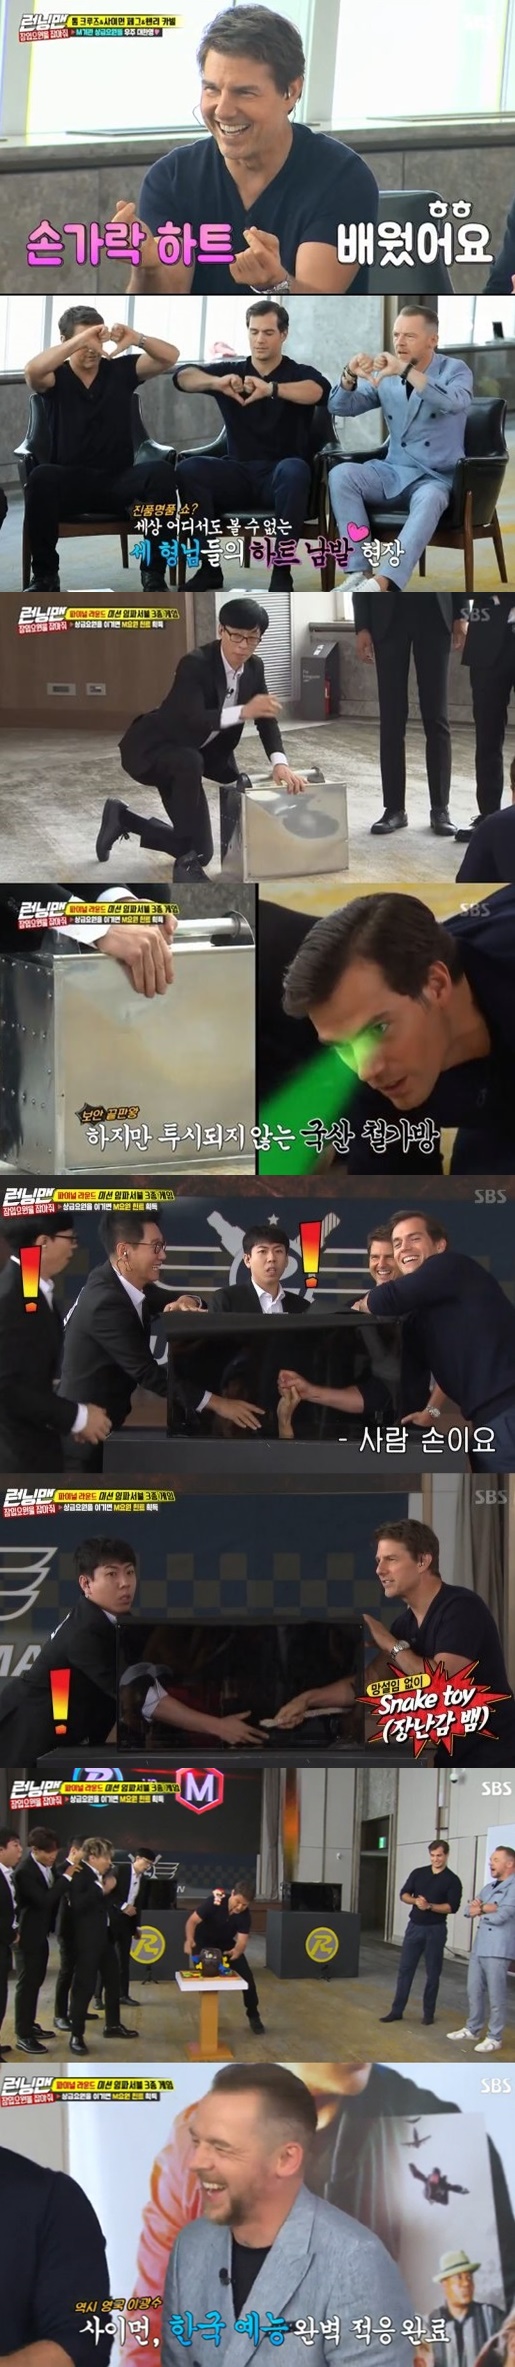 SBS Running Man topped the double-digit ratings and ranked first in the same time zone entertainment ratings.According to Nielsen Korea, the ratings agency, Running Man, which aired on the 22nd, recorded 7.1% of the average TV viewer ratings and 10% of the second part (based on households in the Seoul metropolitan area), beating MBC Masked Wang (9.7%) and KBS2 Happy Sunday (8.2%).In particular, Running Mans double-digit ratings are the second highest ratings this year, only four months after March.Target ratings of 20-49 years old (hereinafter referred to as 2049), which are considered important indicators of advertising officials, also soared to 5.7%, lightly beating Happy Sunday (4.1%) and Masked Wang (2.6%) that were broadcast on the same time zone.The figure is the record of the 2049 rating TOP 3 throughout the entertainment culture program broadcast on the day.On the day of the show, Tom Cruise, Henry Carville and Simon Pegg, the actors of the movie Mission Impossible: Fall Out, which became a hot topic only with trailers, appeared in a surprise appearance.Hold me on to Project 2: Hold the infiltrators.Tom Cruise, who was the ninth to visit Korea, said, I am so glad to be able to come out of Running Man. Henry Carville, who first visited Korea, said, I am so excited and excited.Thank you for inviting me. Simon Pegg also enthused the members of Running Man with his unexpected finger heart attack, saying, Im enjoying this time for my second visit to Korea.Tom Cruise and Henry Carville also joined the Heart Attack and created various hearts and laughed.The final match between the members of Running Man and Mission Impossible was held. Although it was a limited recording time, the members of Mission surprised everyone with their Game fighting.In the Iron Bag Quiz, he did not mind lying on the floor, he wrote Trick Operation, and he overpowered the Running Man members with his best efforts in every Game.Tom Cruise played the Game of Uncle Tong, up to 11.6%, and took the best one minute.Tom Cruise said, It was a really fun time.The members of Running Man are great, he said, and the members thanked the three actors for presenting the signature name tag of Running Man as a gift.